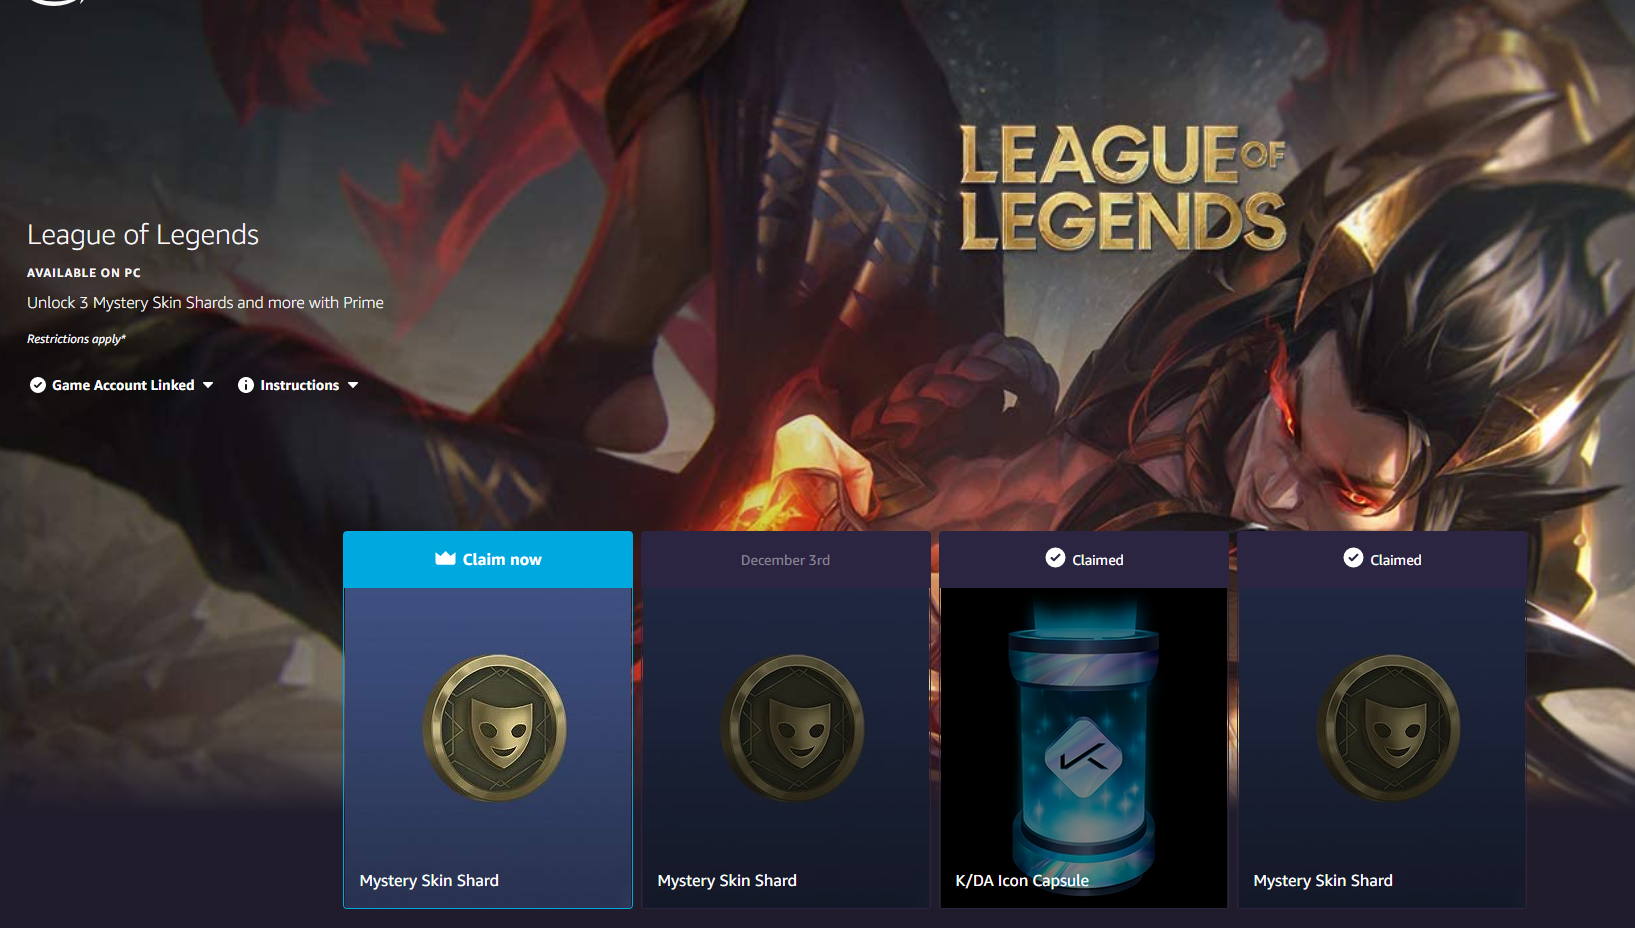 How to Get Twitch Prime League of Legends Free Loot + Summoner's